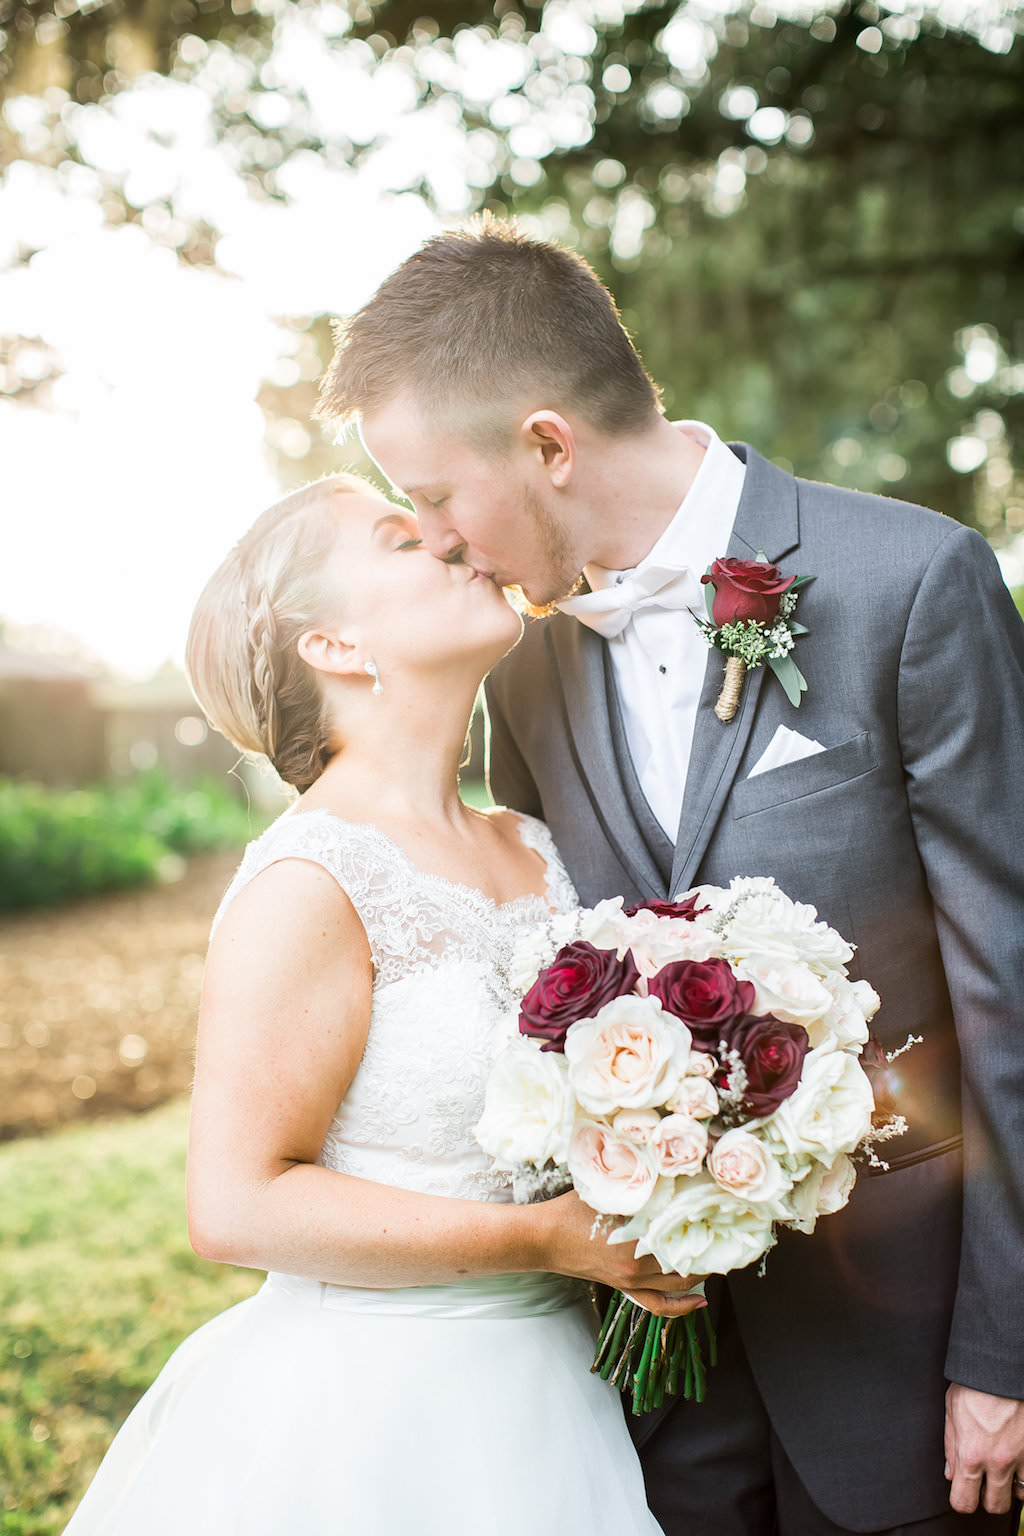 Bride and Groom Outdoor Garden Portrait with Groom in Gray Suit with White Bowtie and Red Rose Boutonniere, with Blush, Cream, and Burgundy Rose Bouquet | Tampa Bay Wedding Photographer Rad Red Creative